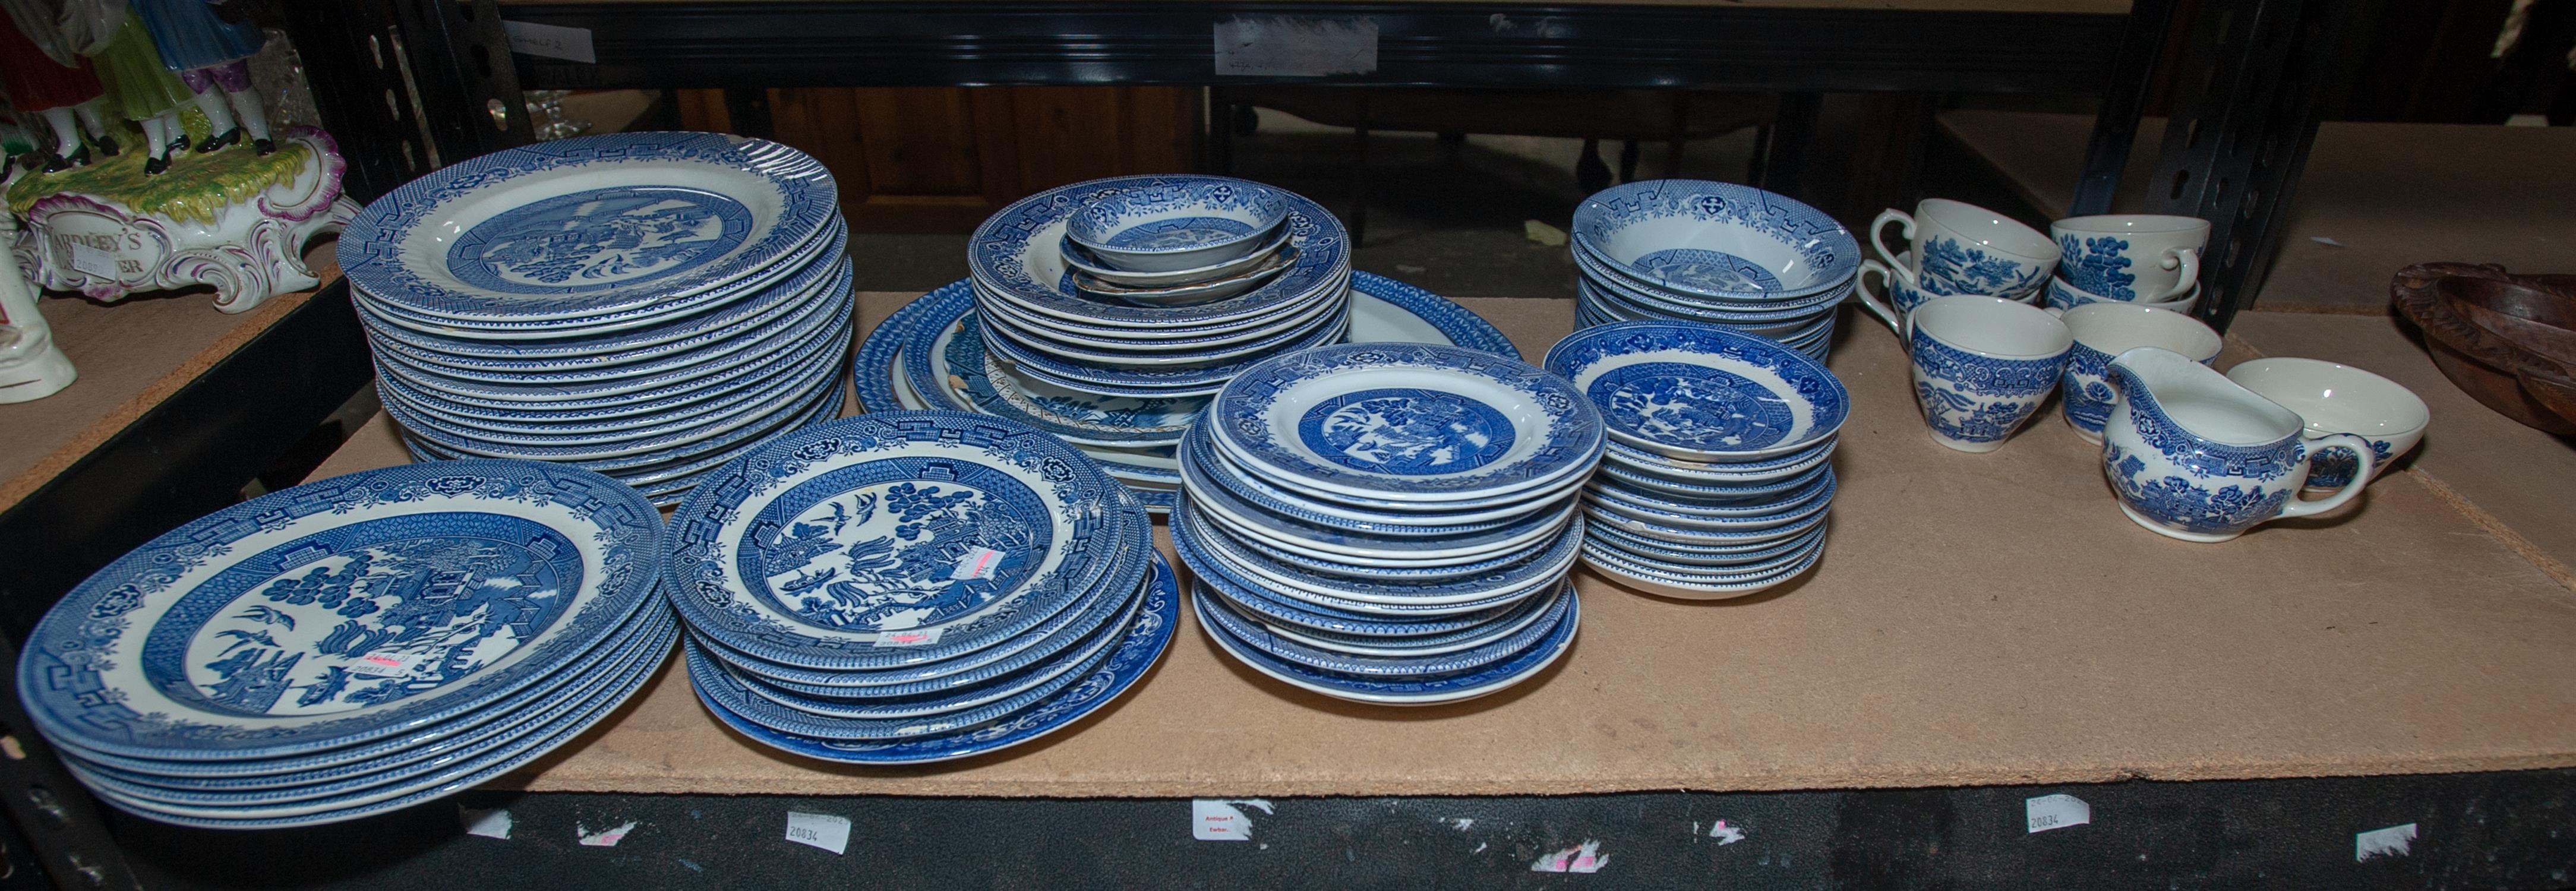 Blue and white Willow pattern part Dinner service items include approx.40 plates, teapot, bowls, - Image 2 of 2